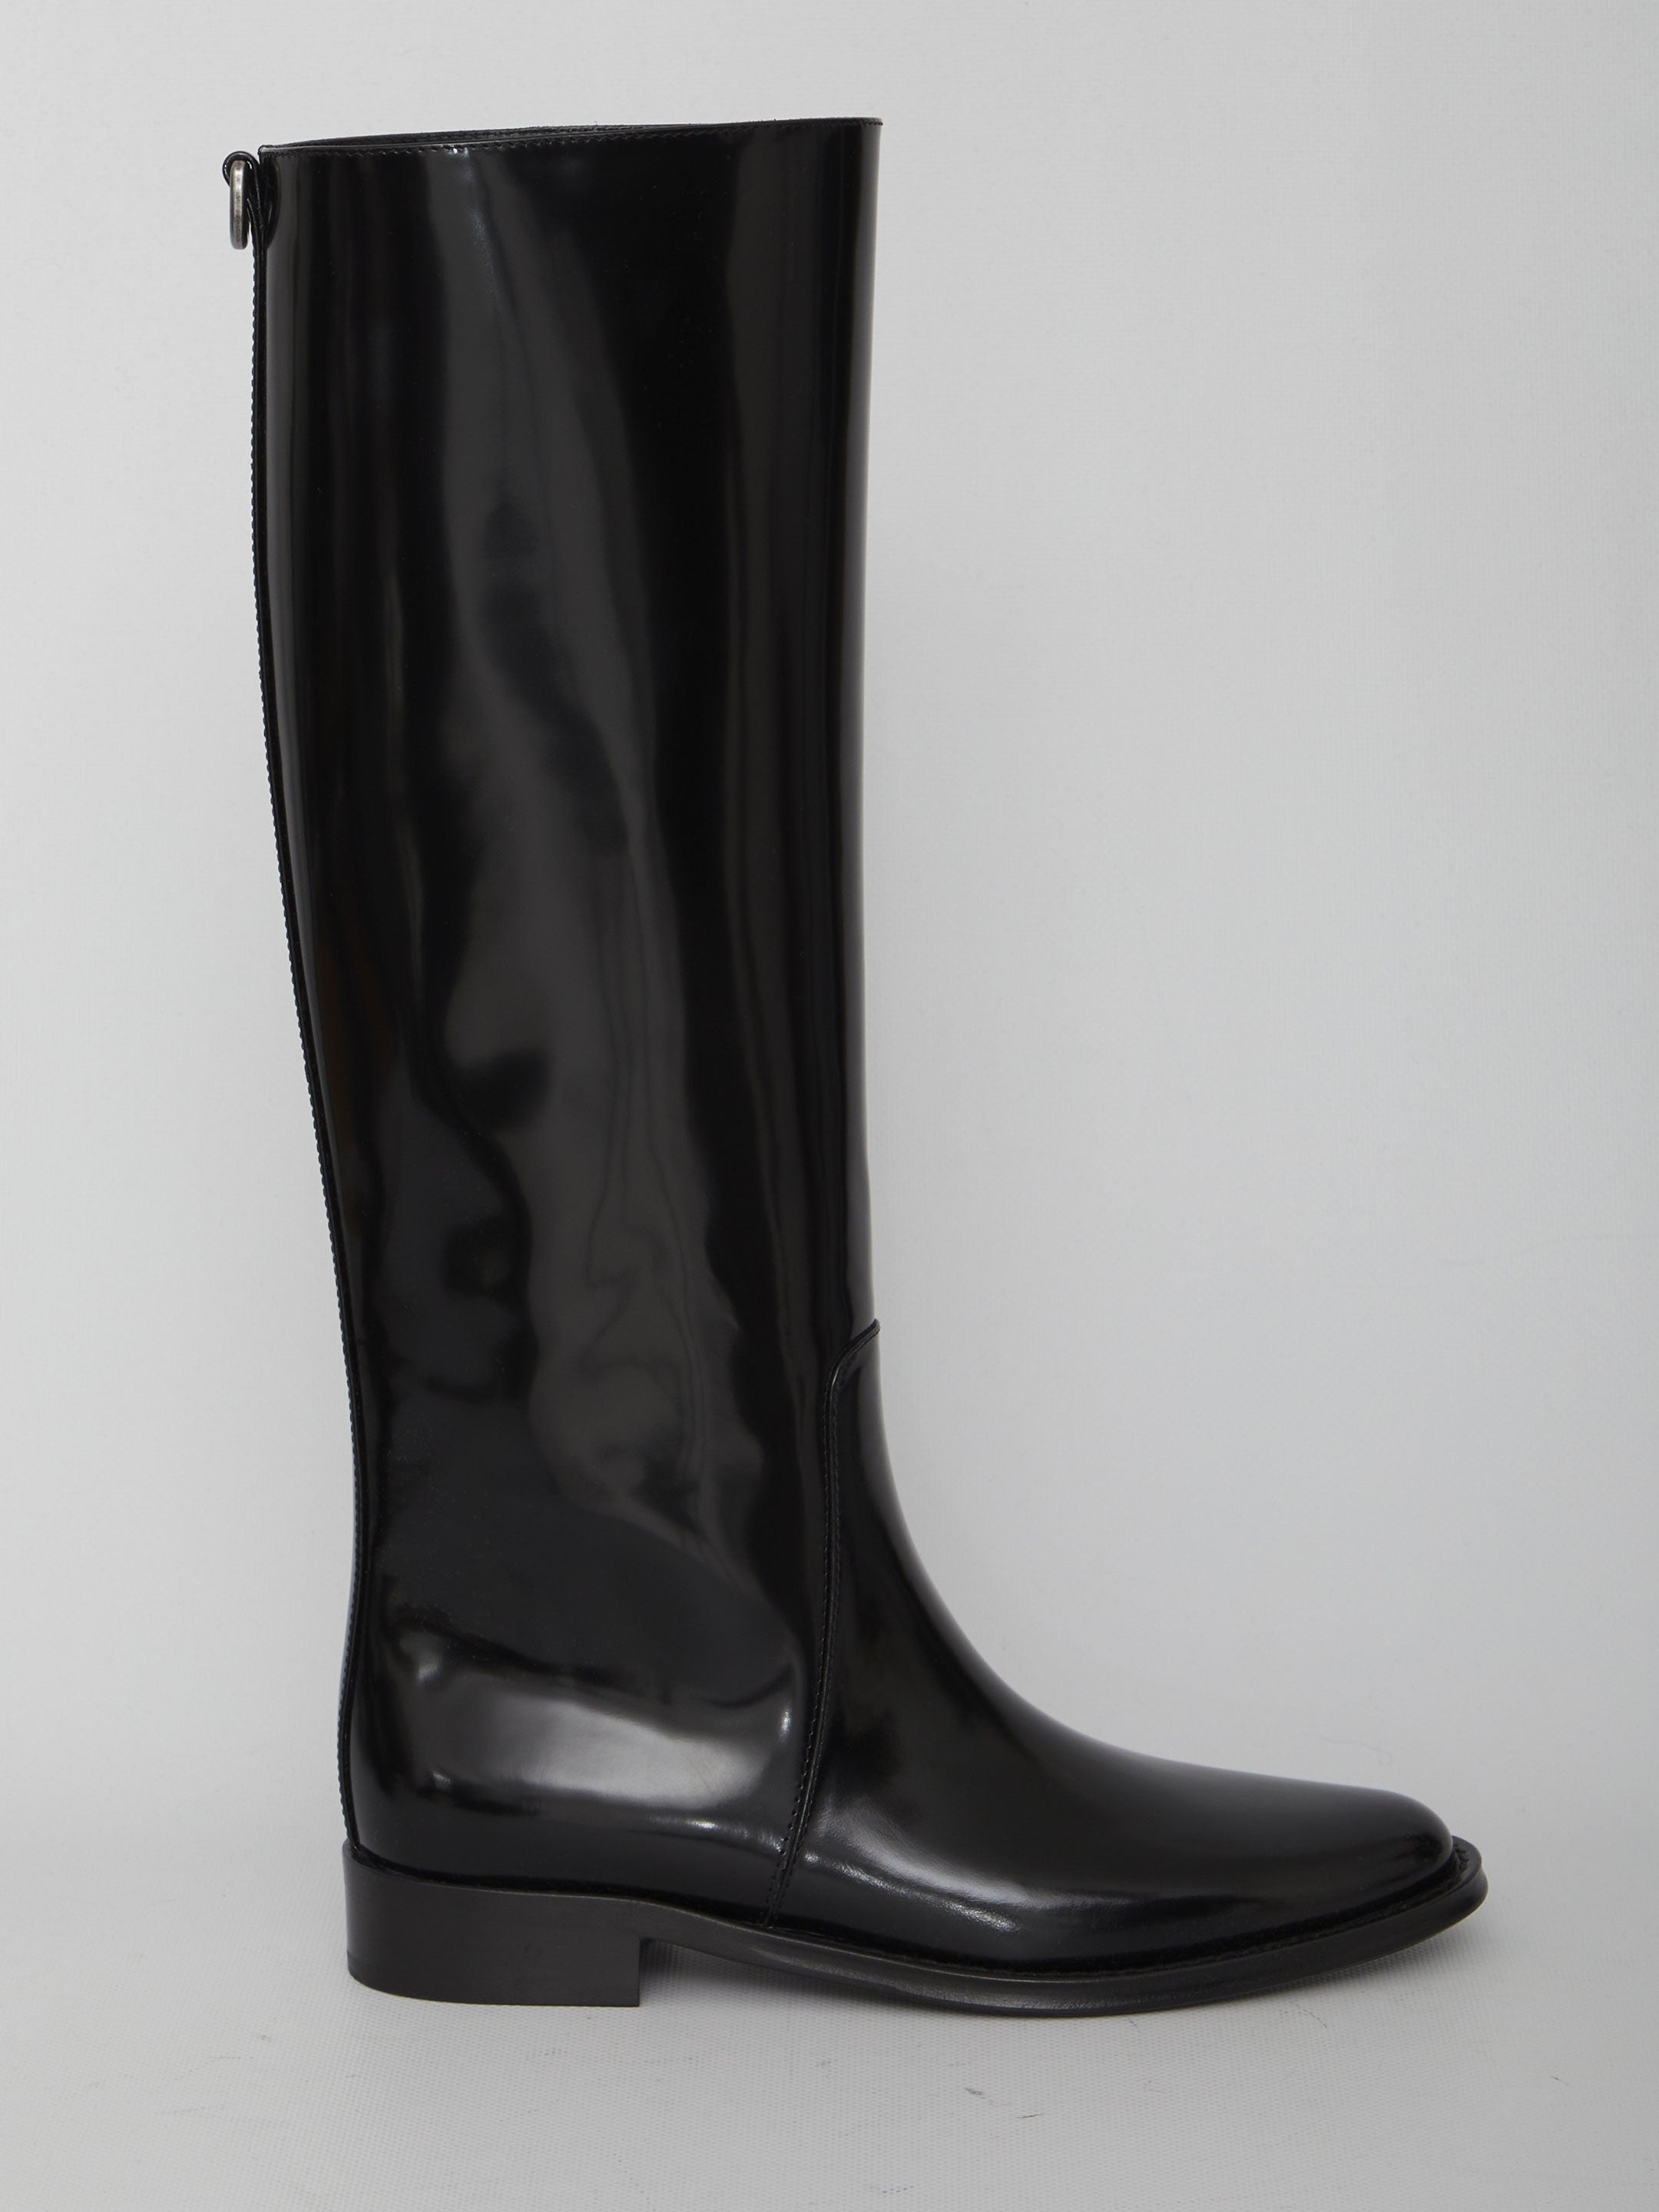 Hunt boots in glazed leather